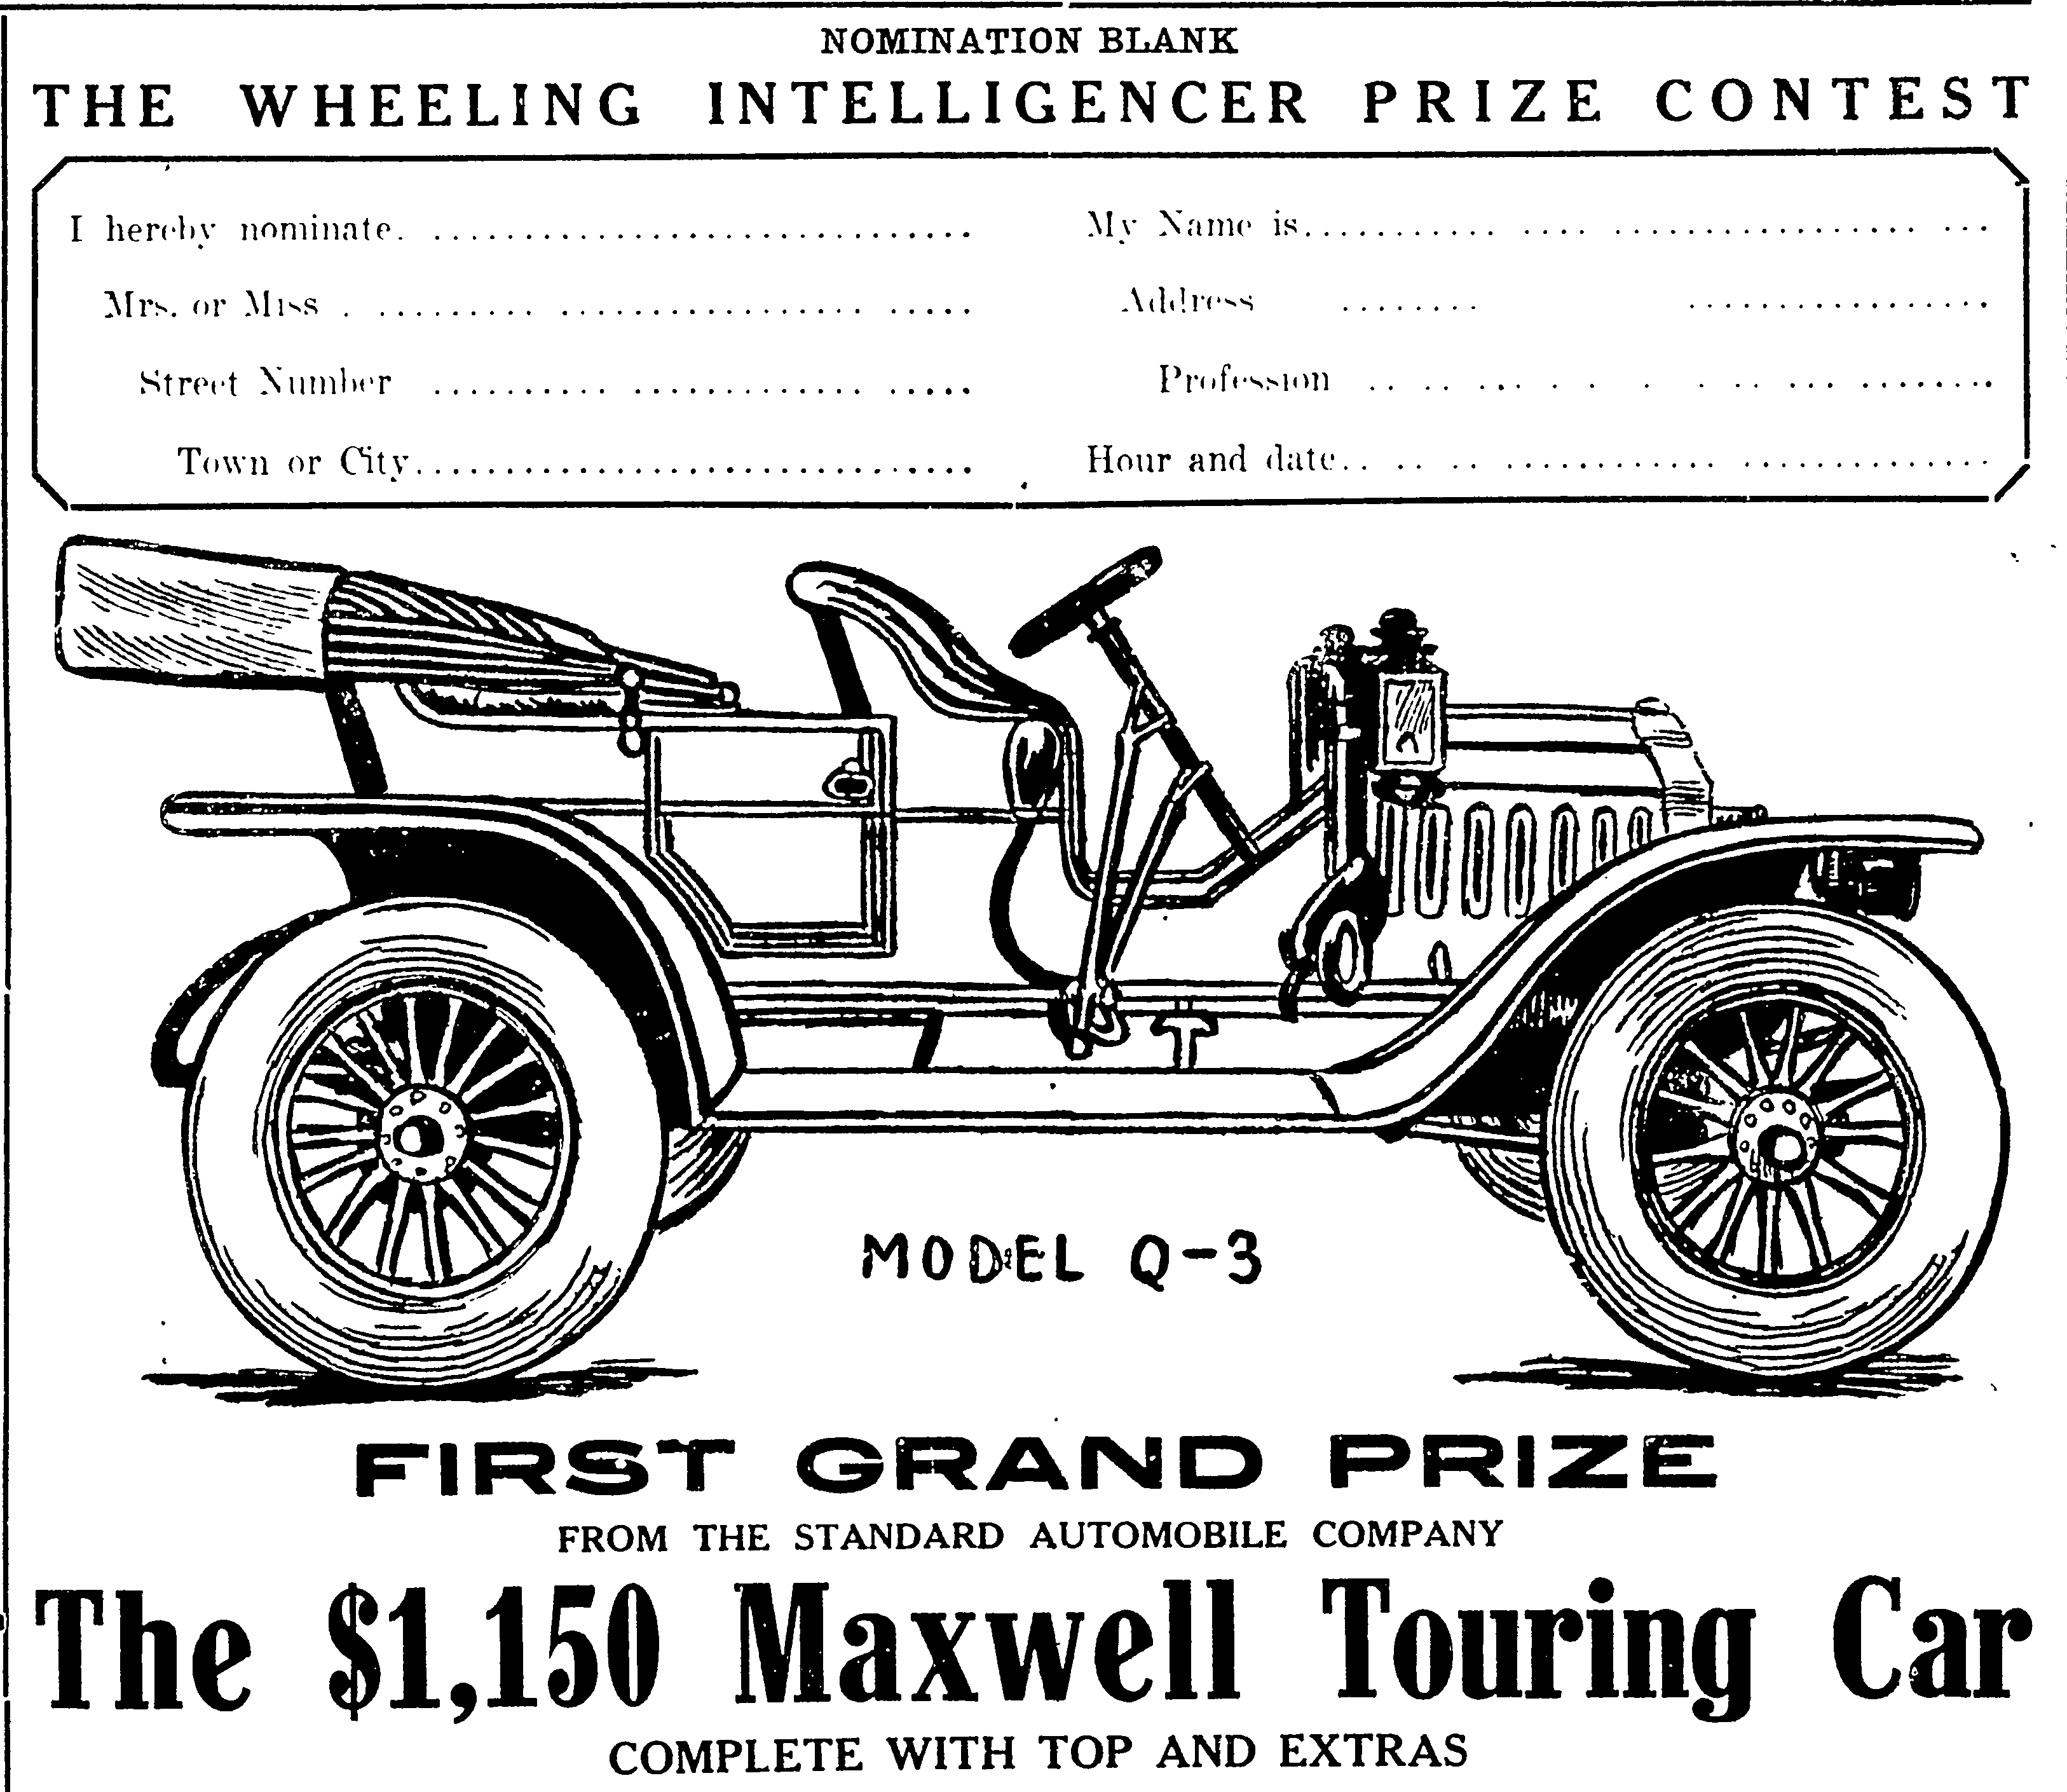 First Grand Prize and nomination form for Wheeling Women Popularity Contest, 1910